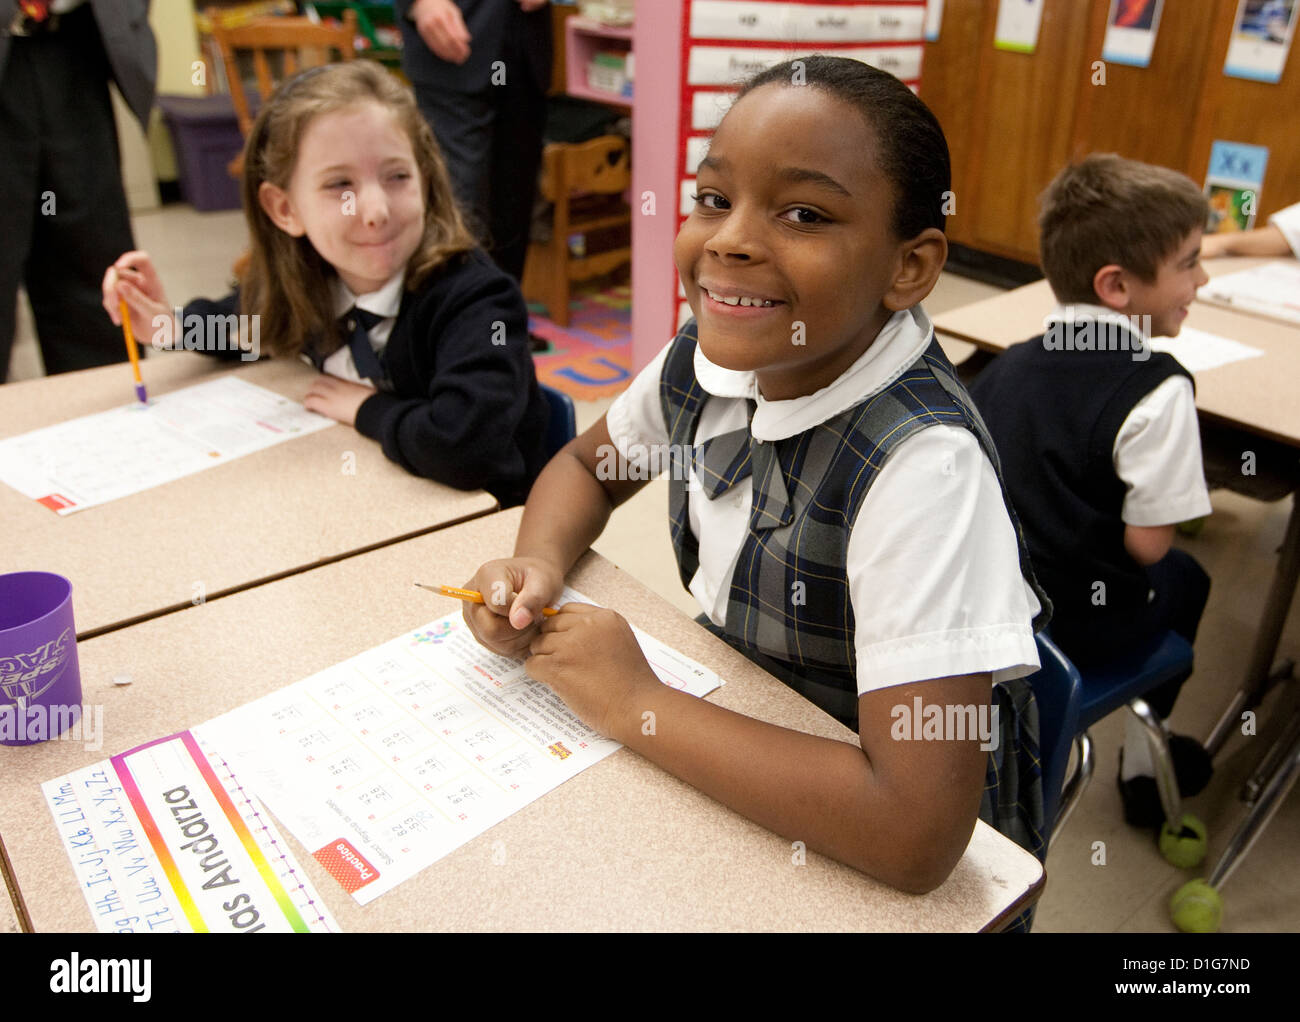 Second grade elementary  children girls Anglo and African-American wearing uniforms complete school work at Catholic school Stock Photo